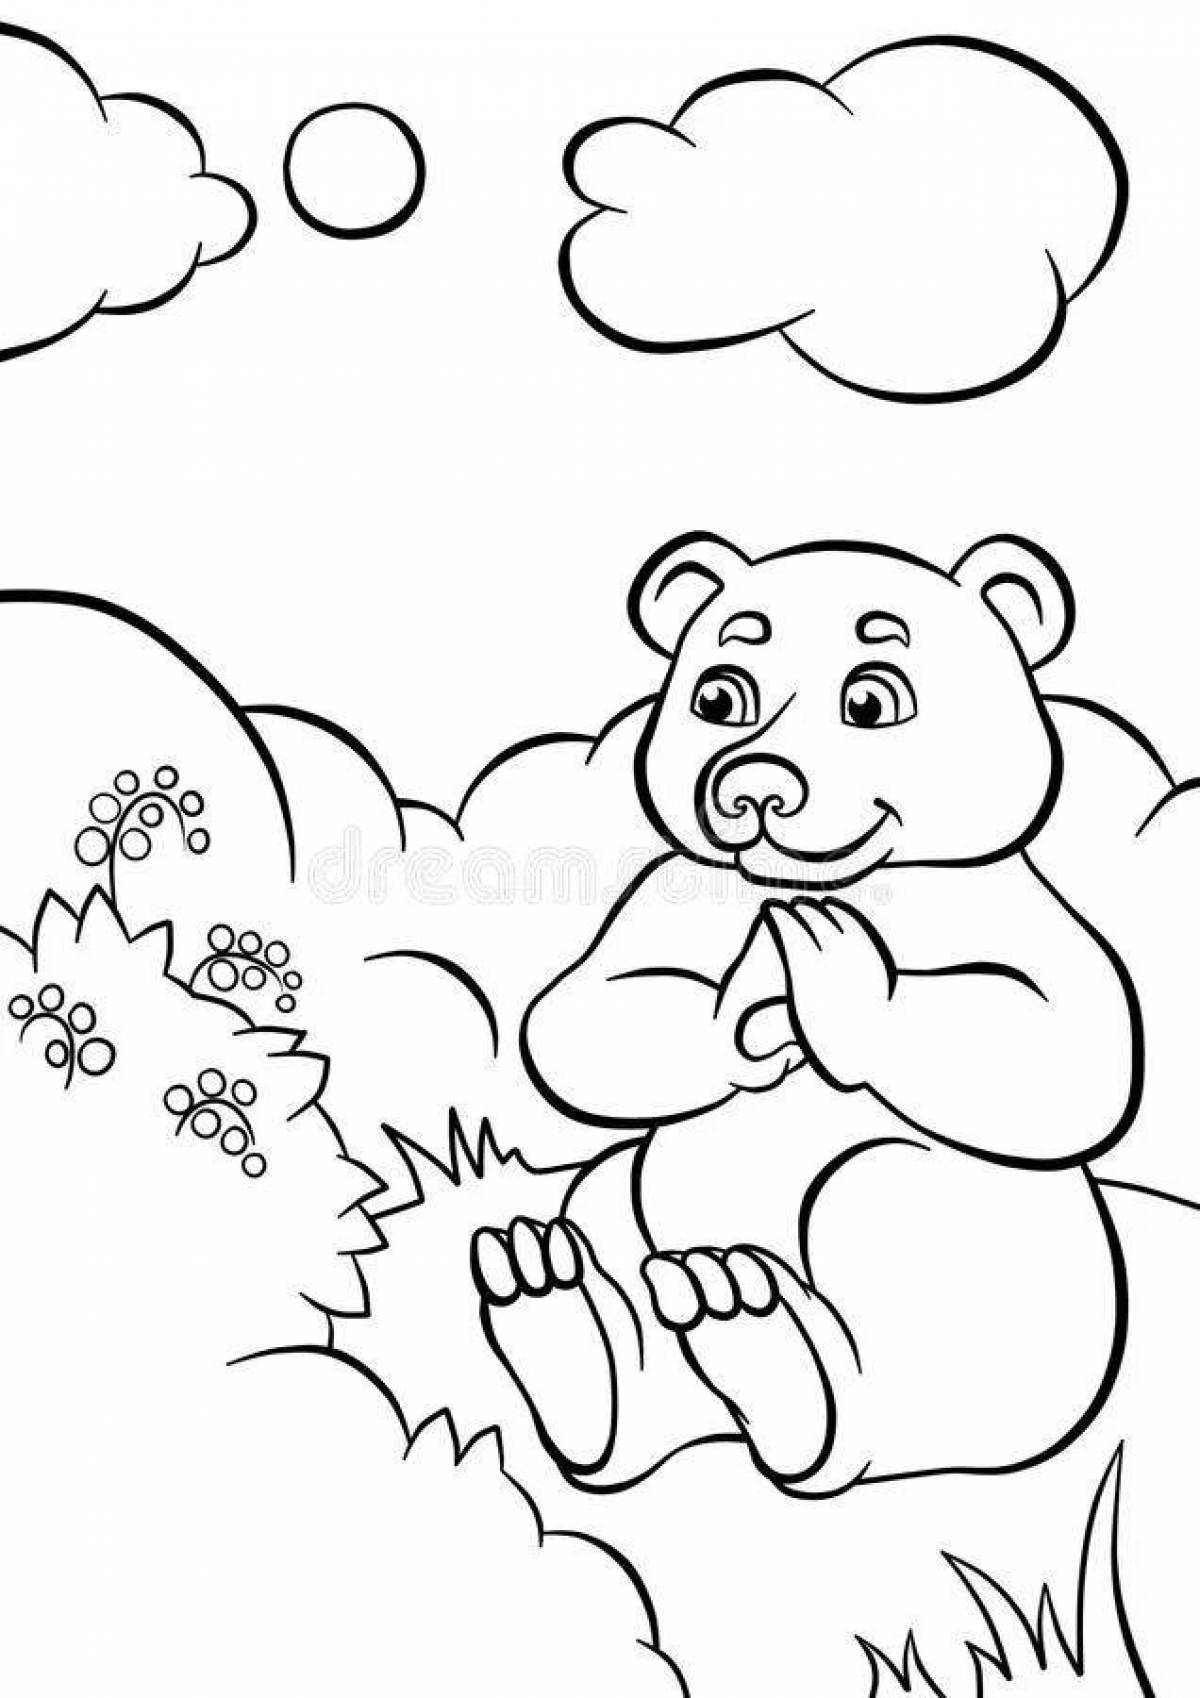 Bear in the forest #5